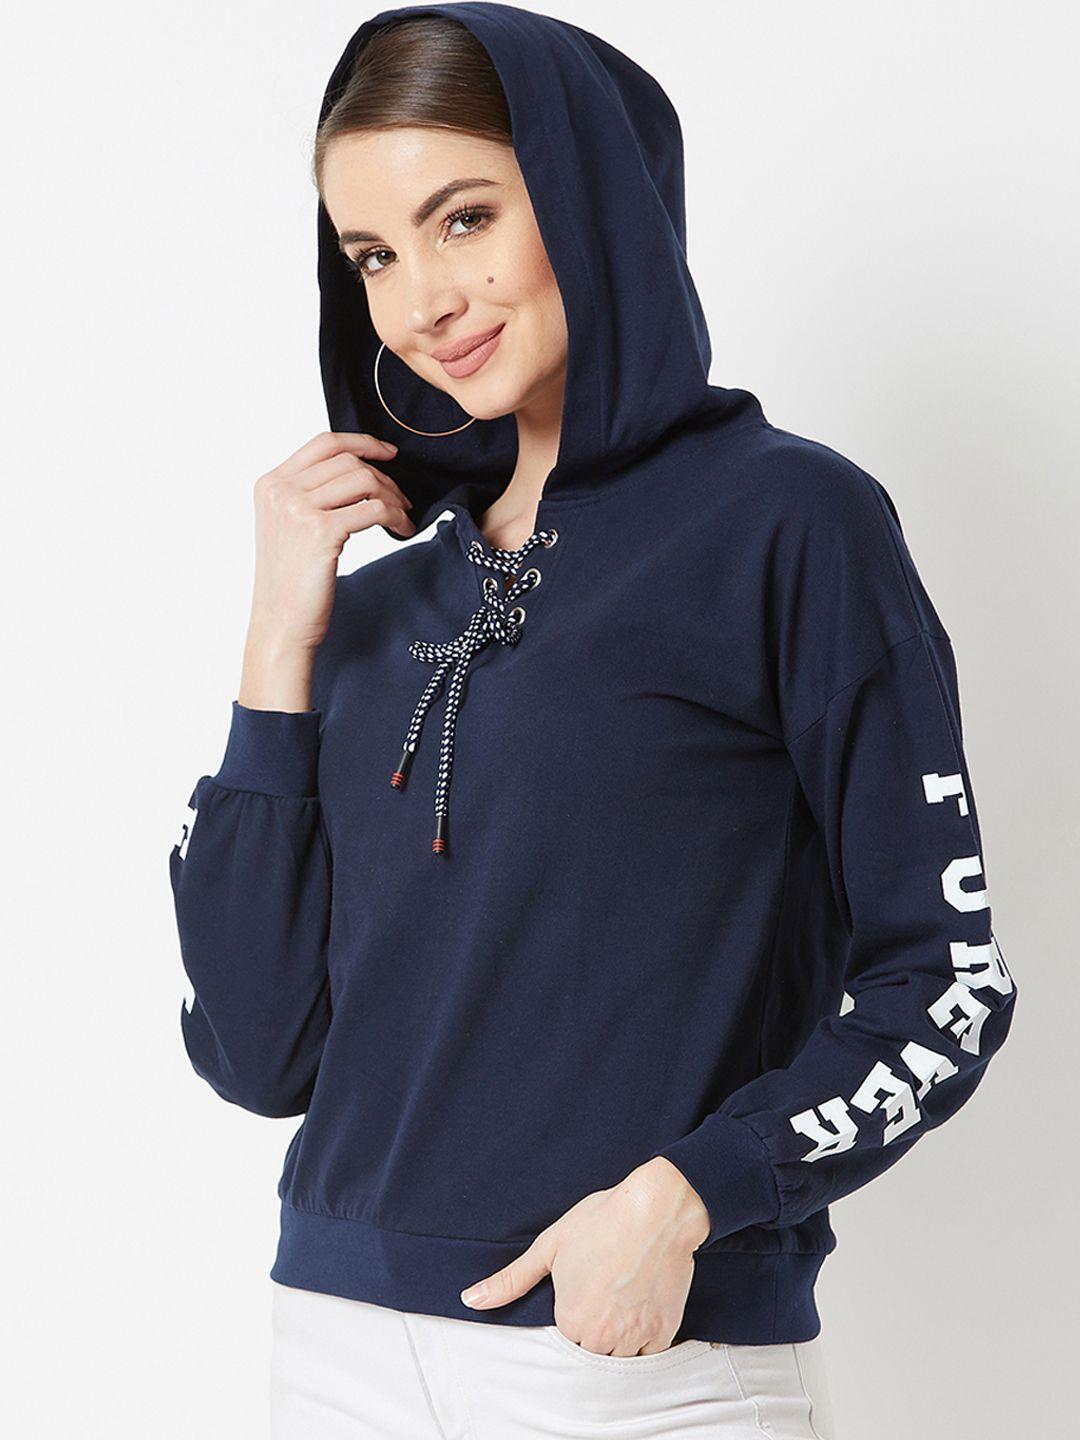 miss-chase-women-navy-blue-&-white-solid-hooded-sweatshirt